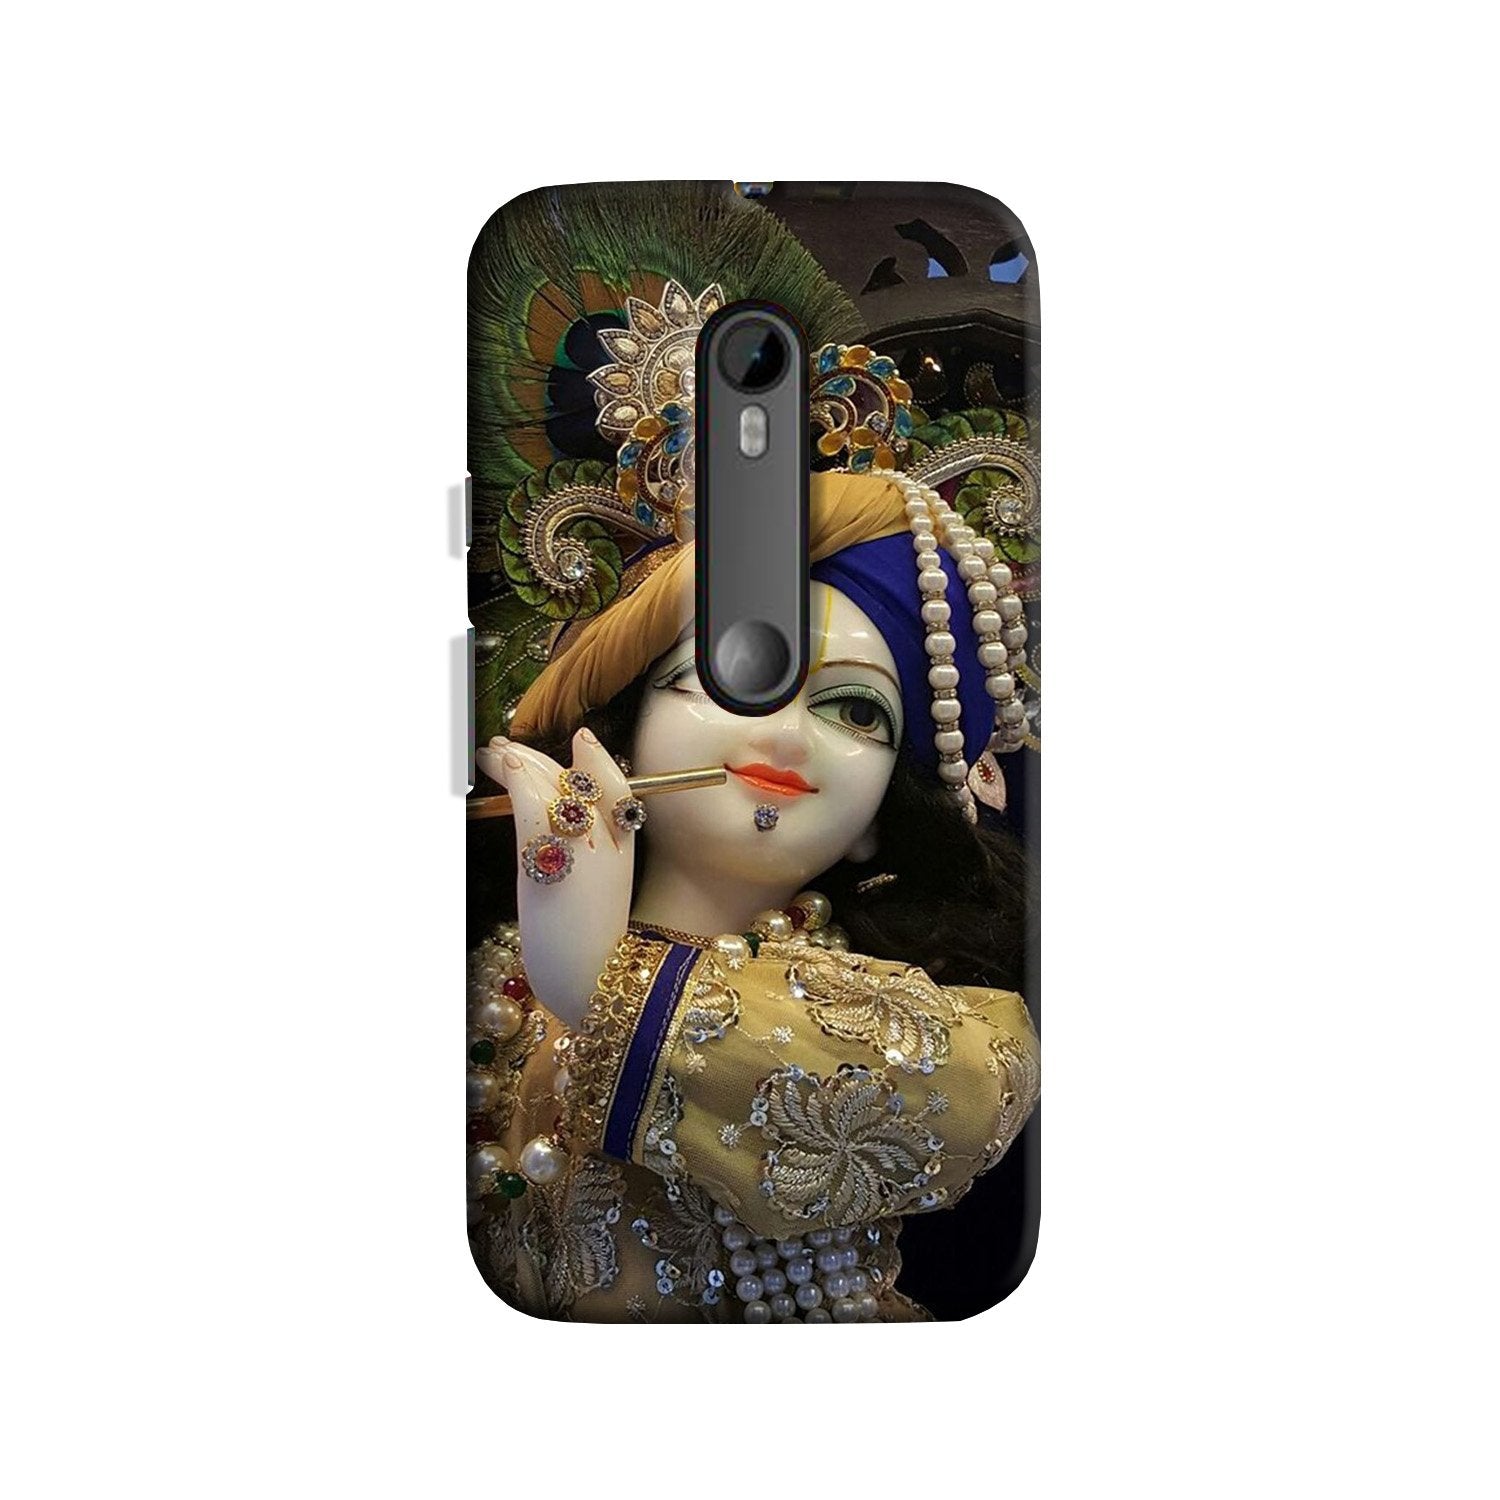 Lord Krishna3 Case for Moto X Play